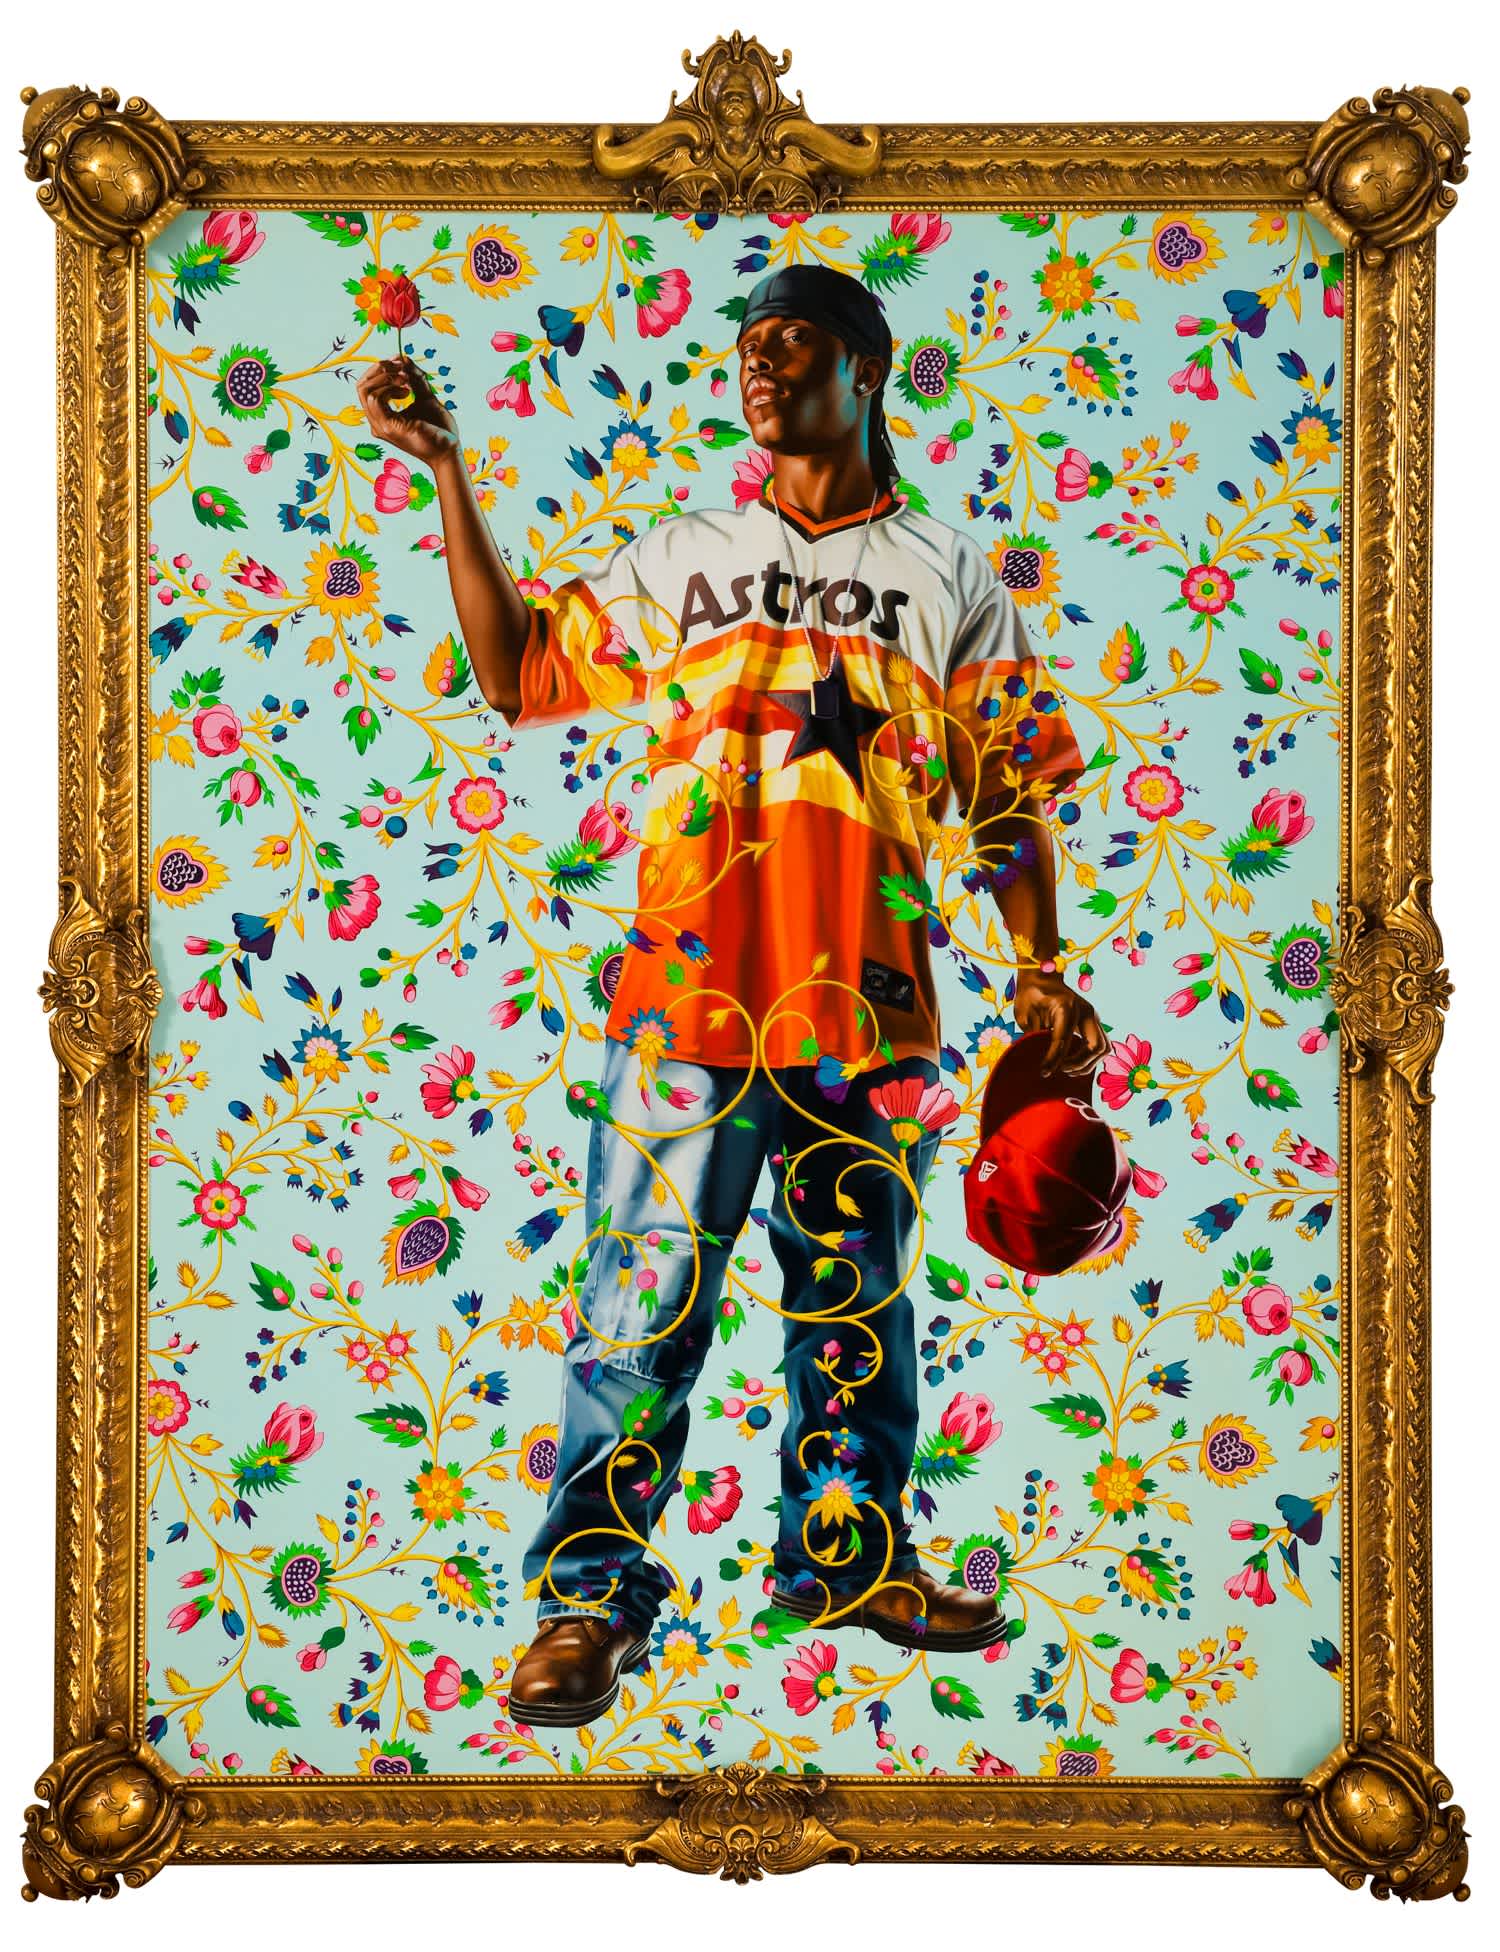 Kehinde Wiley, Philip the Fair. Featured in the 2016 exhibition Turn the Page: The First Ten Years of Hi-Fructose at the Virginia Museum of Contemporary Art (Virginia MOCA).